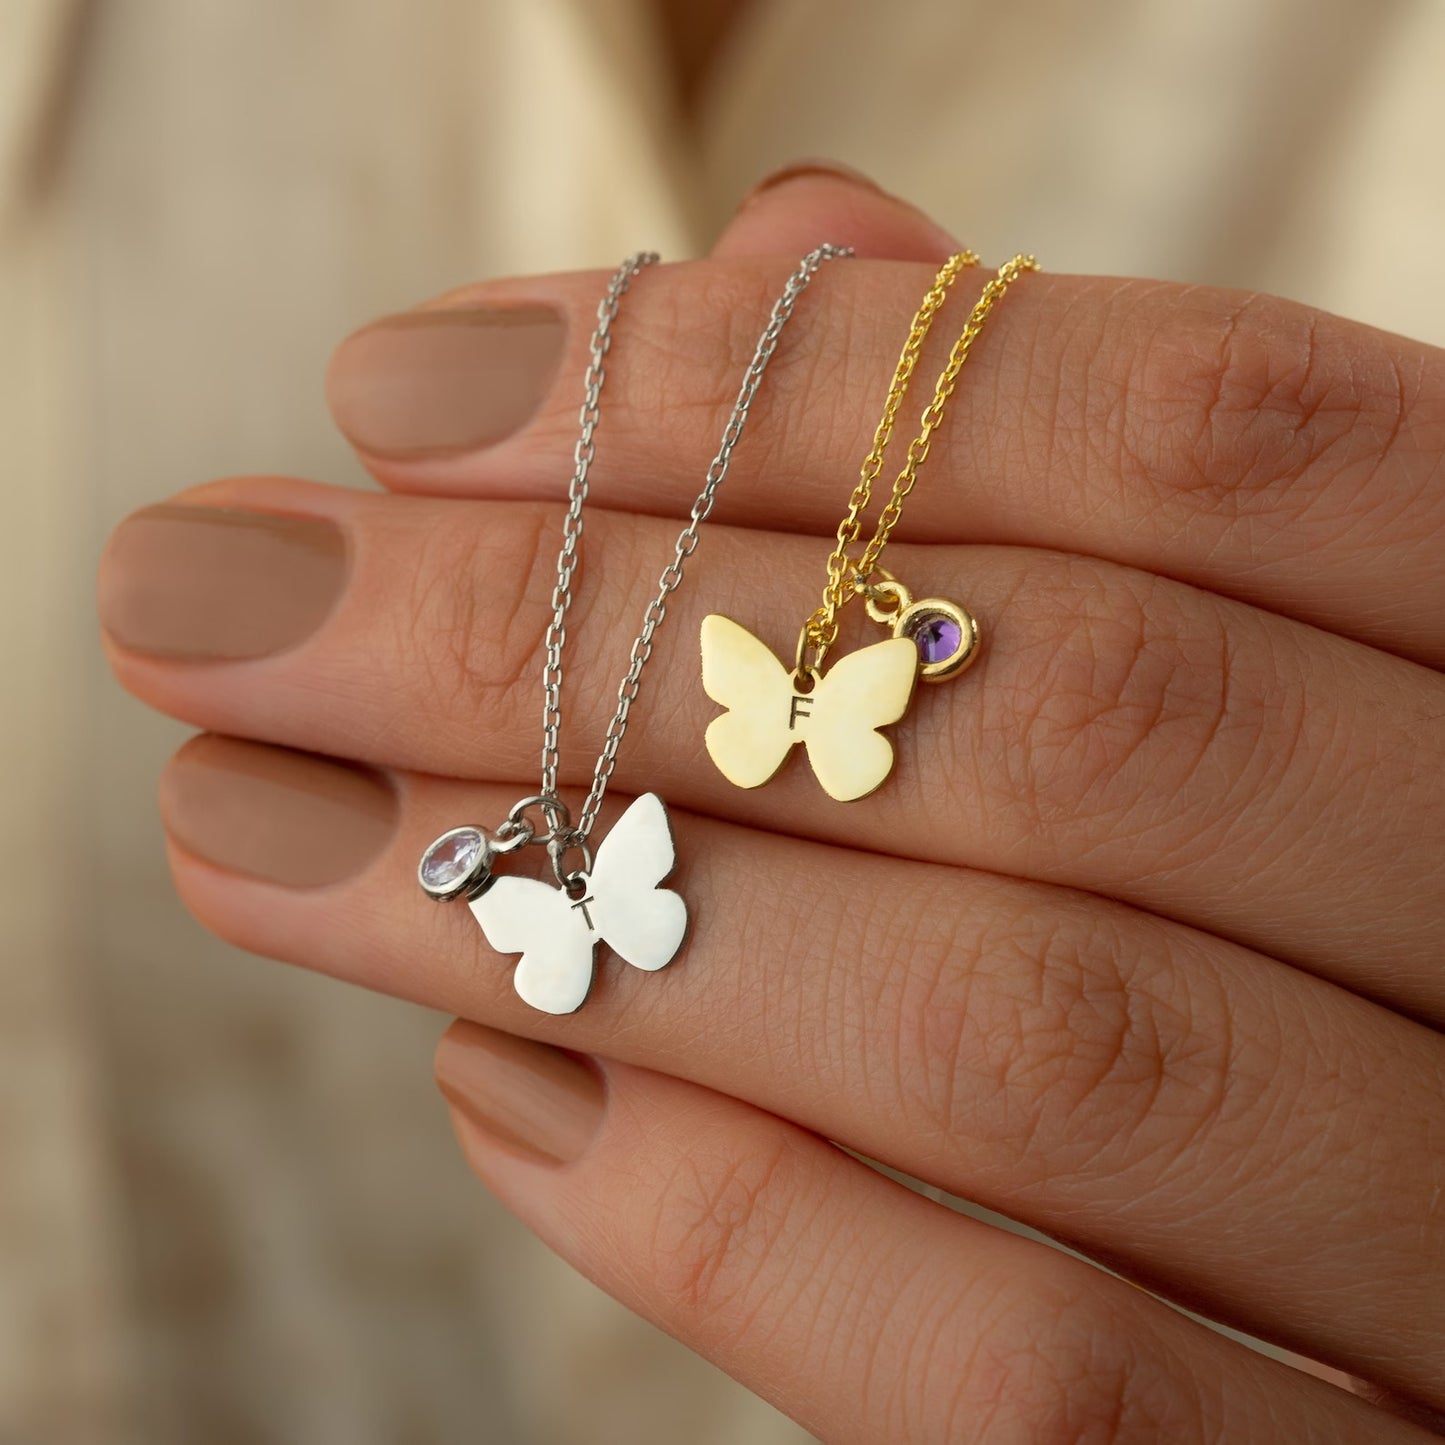 Personalized Gold Butterfly Initial Birthstone Necklace Designed and handcrafted in the UAE.  Pamper your loved one with this exquisite 18 carat gold butterfly initial birthstone necklace, complete with a delicate gold butterfly, birthstone and the initial of your choice.